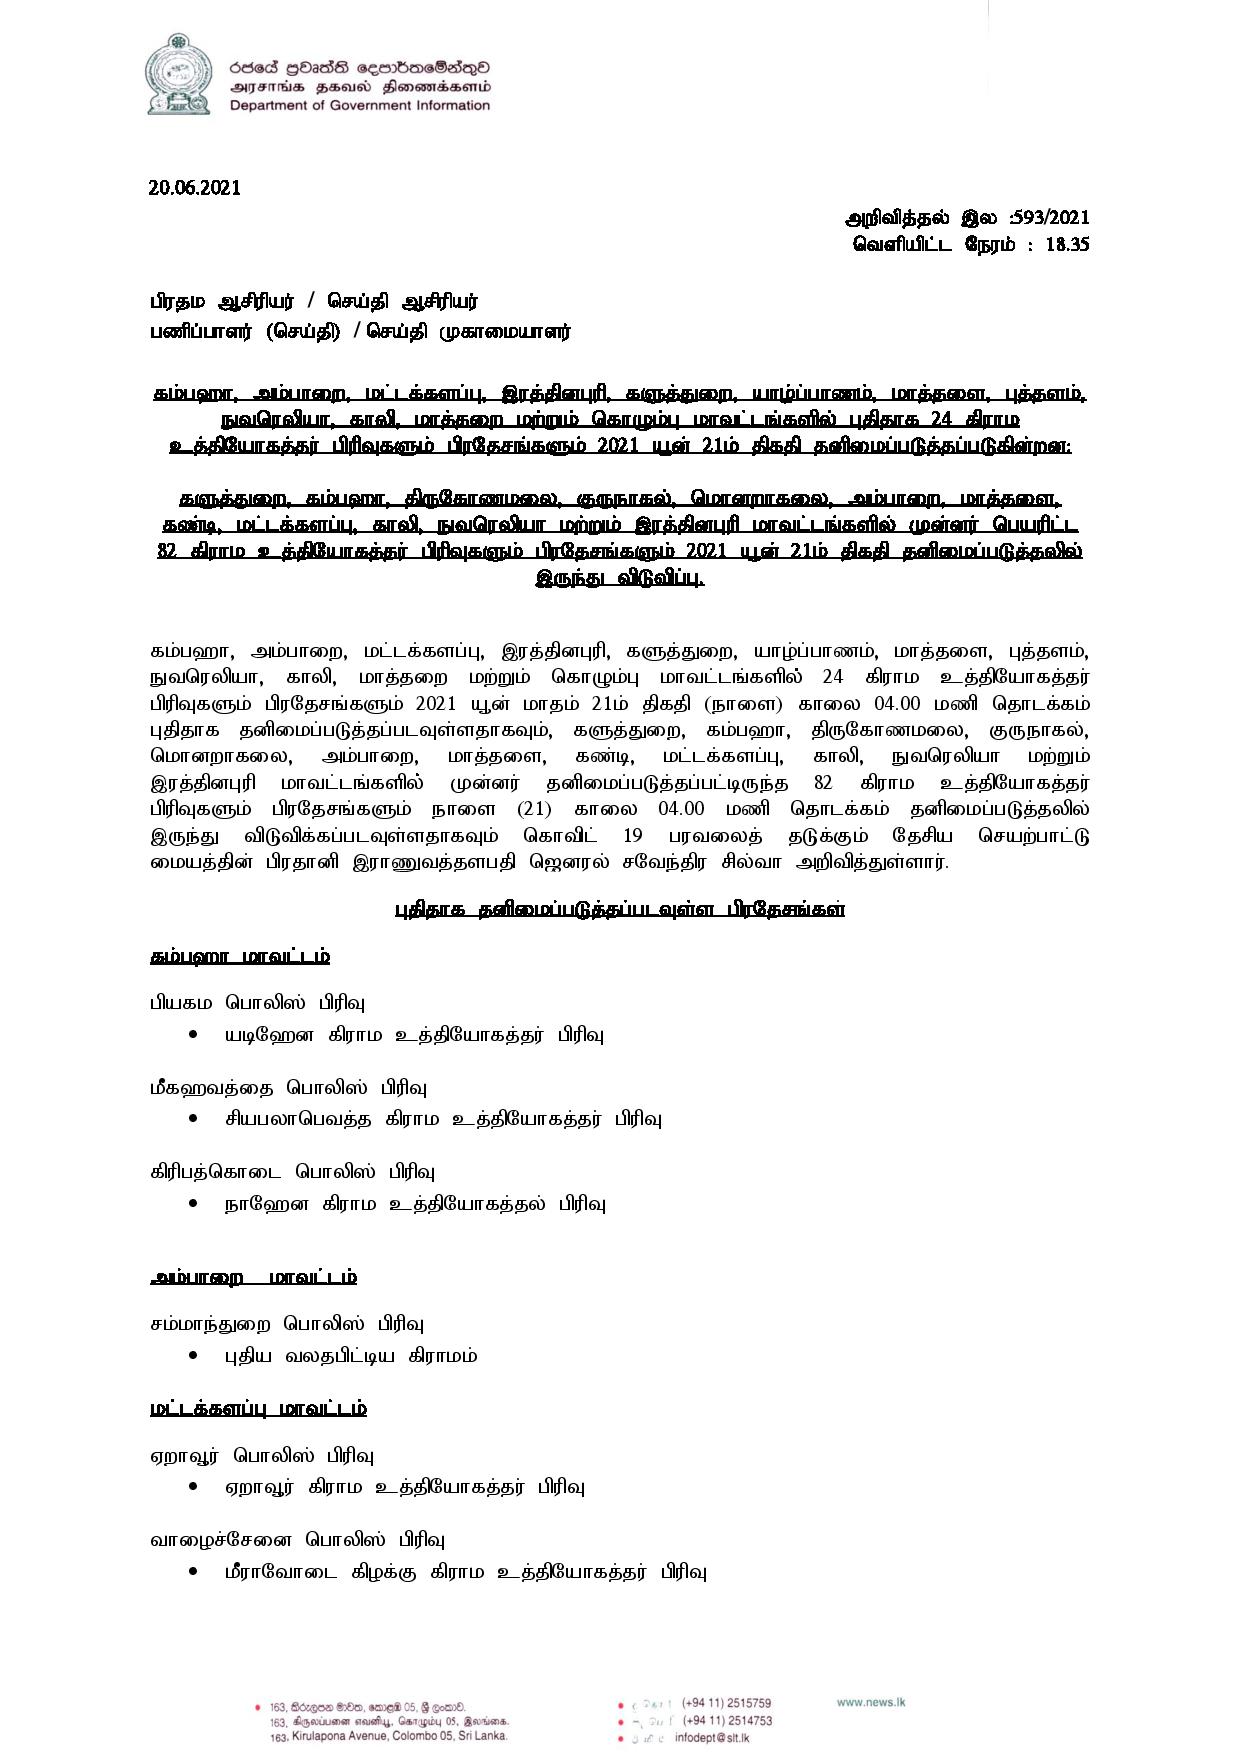 Press Release 593 Tamil page 001